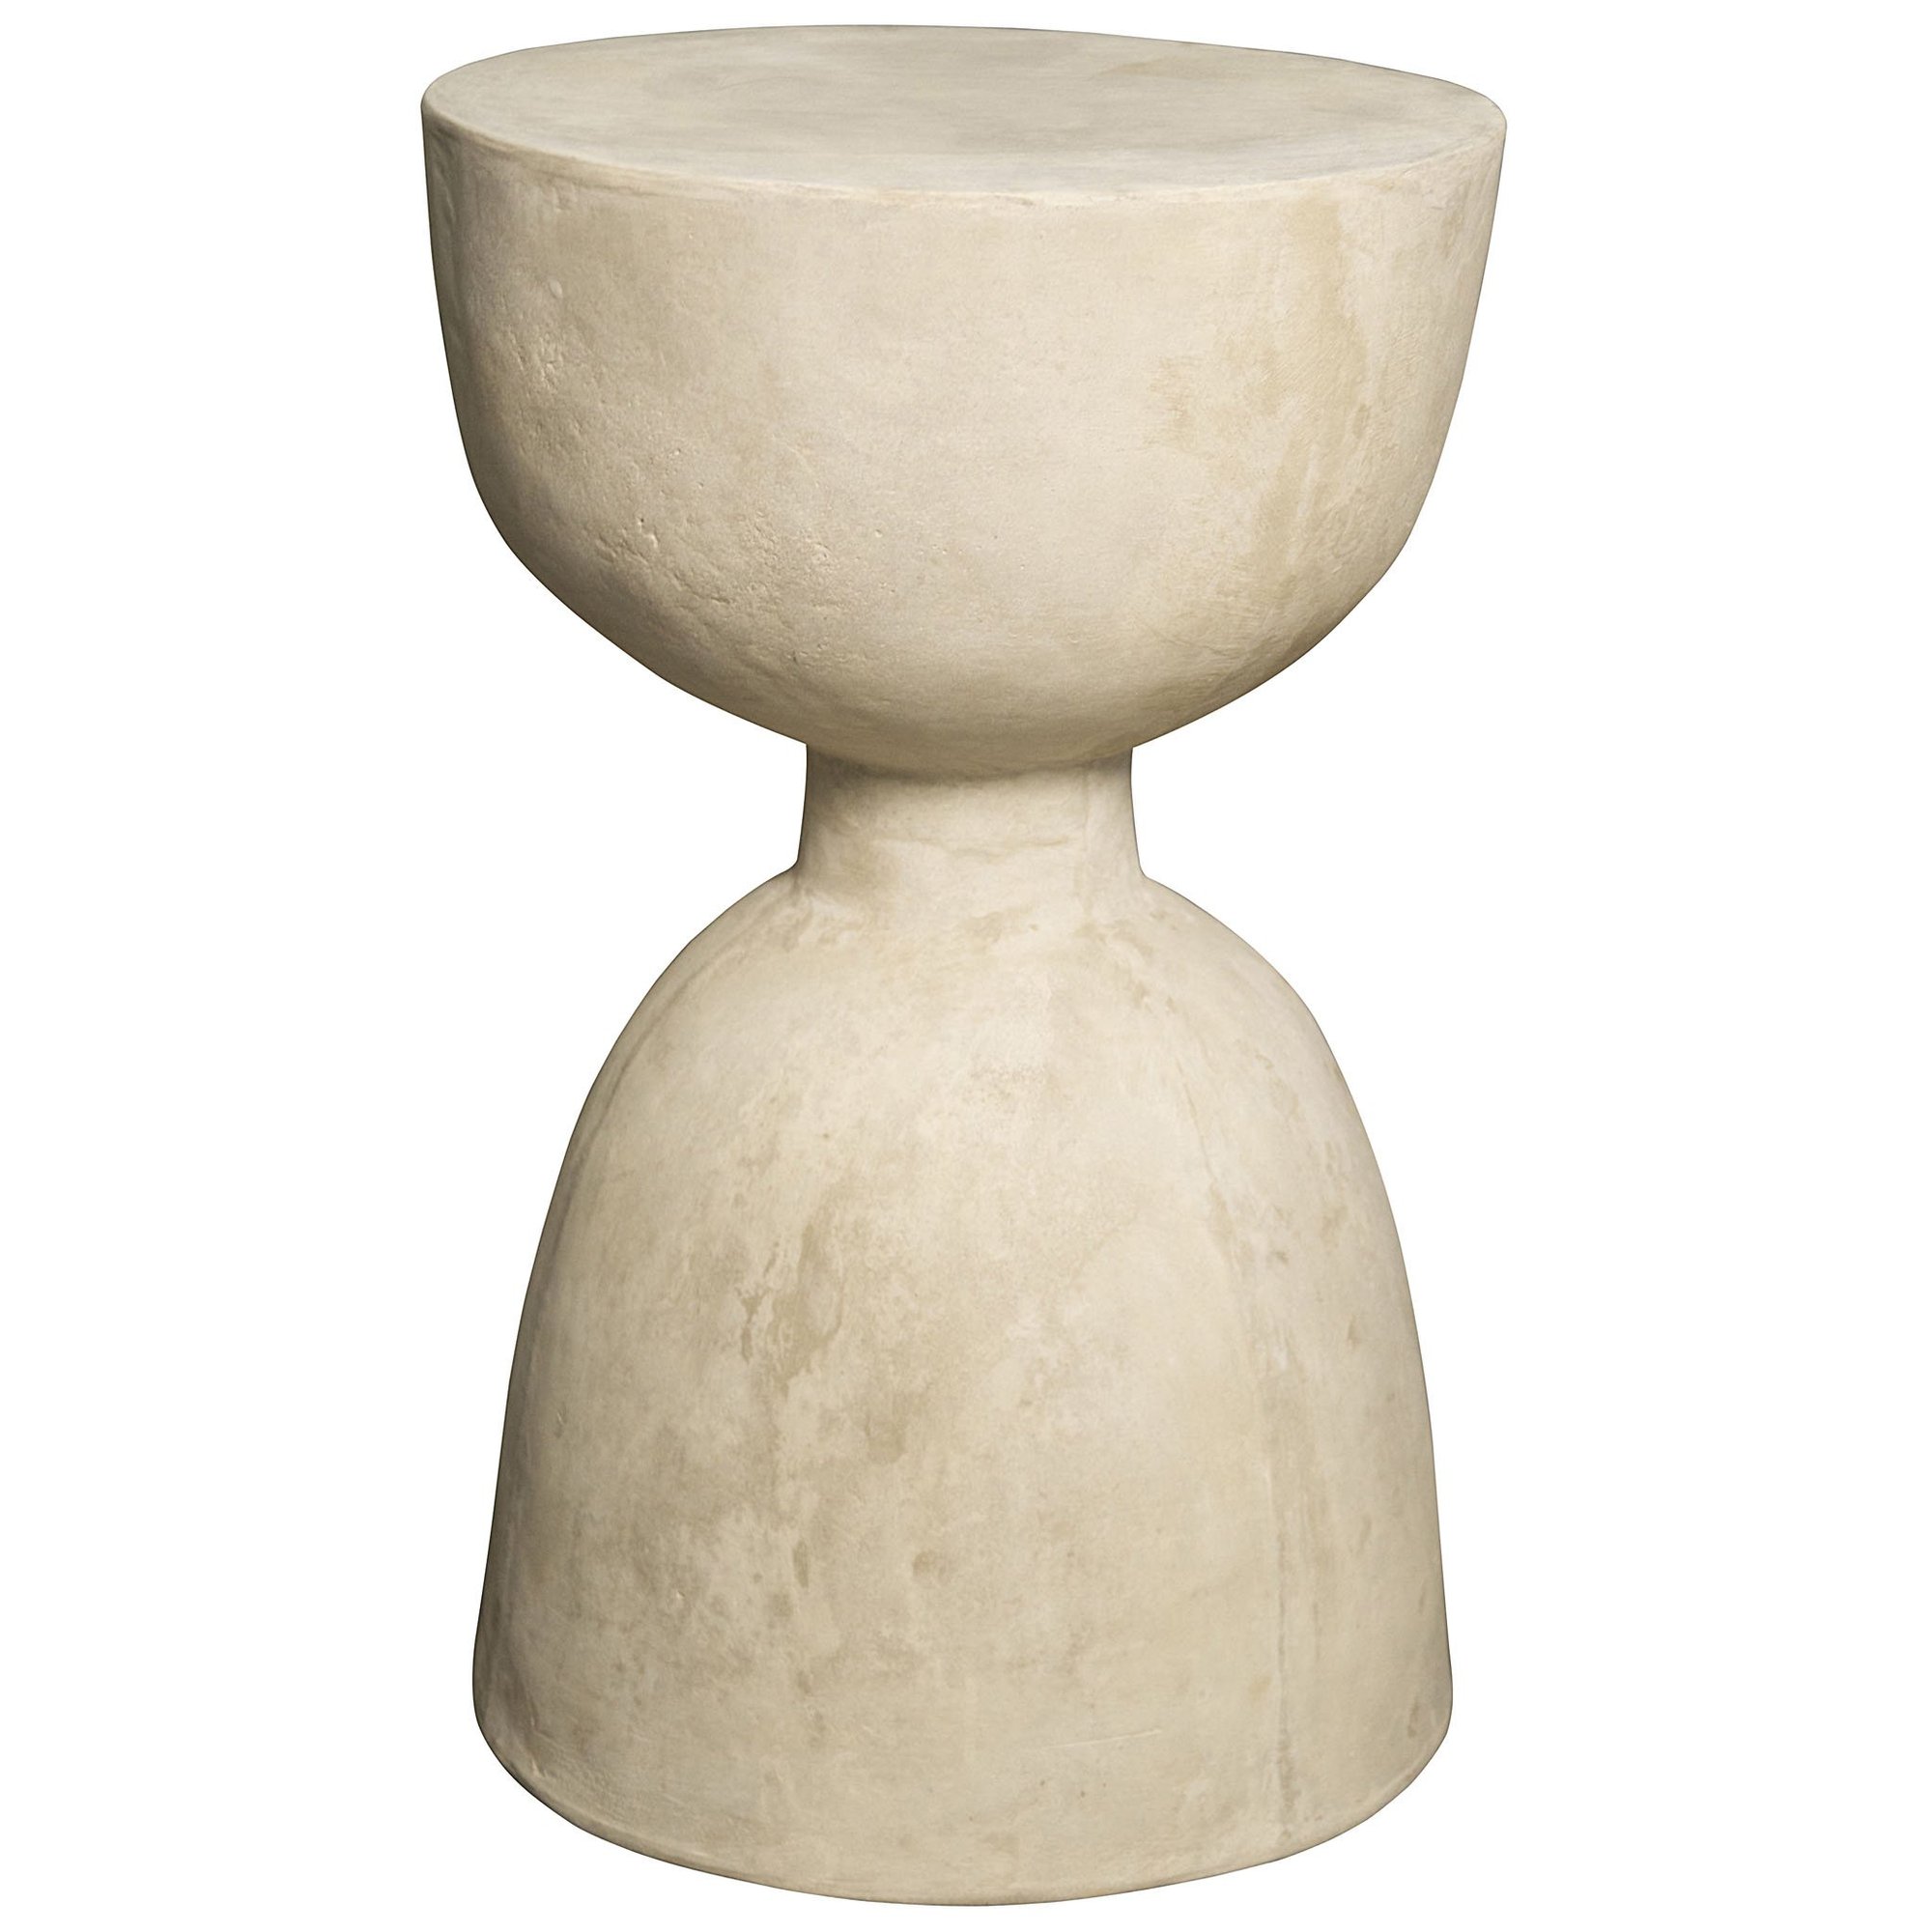 hourglass stool fiber cement bliss home design boir accent table side fashioned from with natural color and texture finished inch square tablecloth white desk chair target